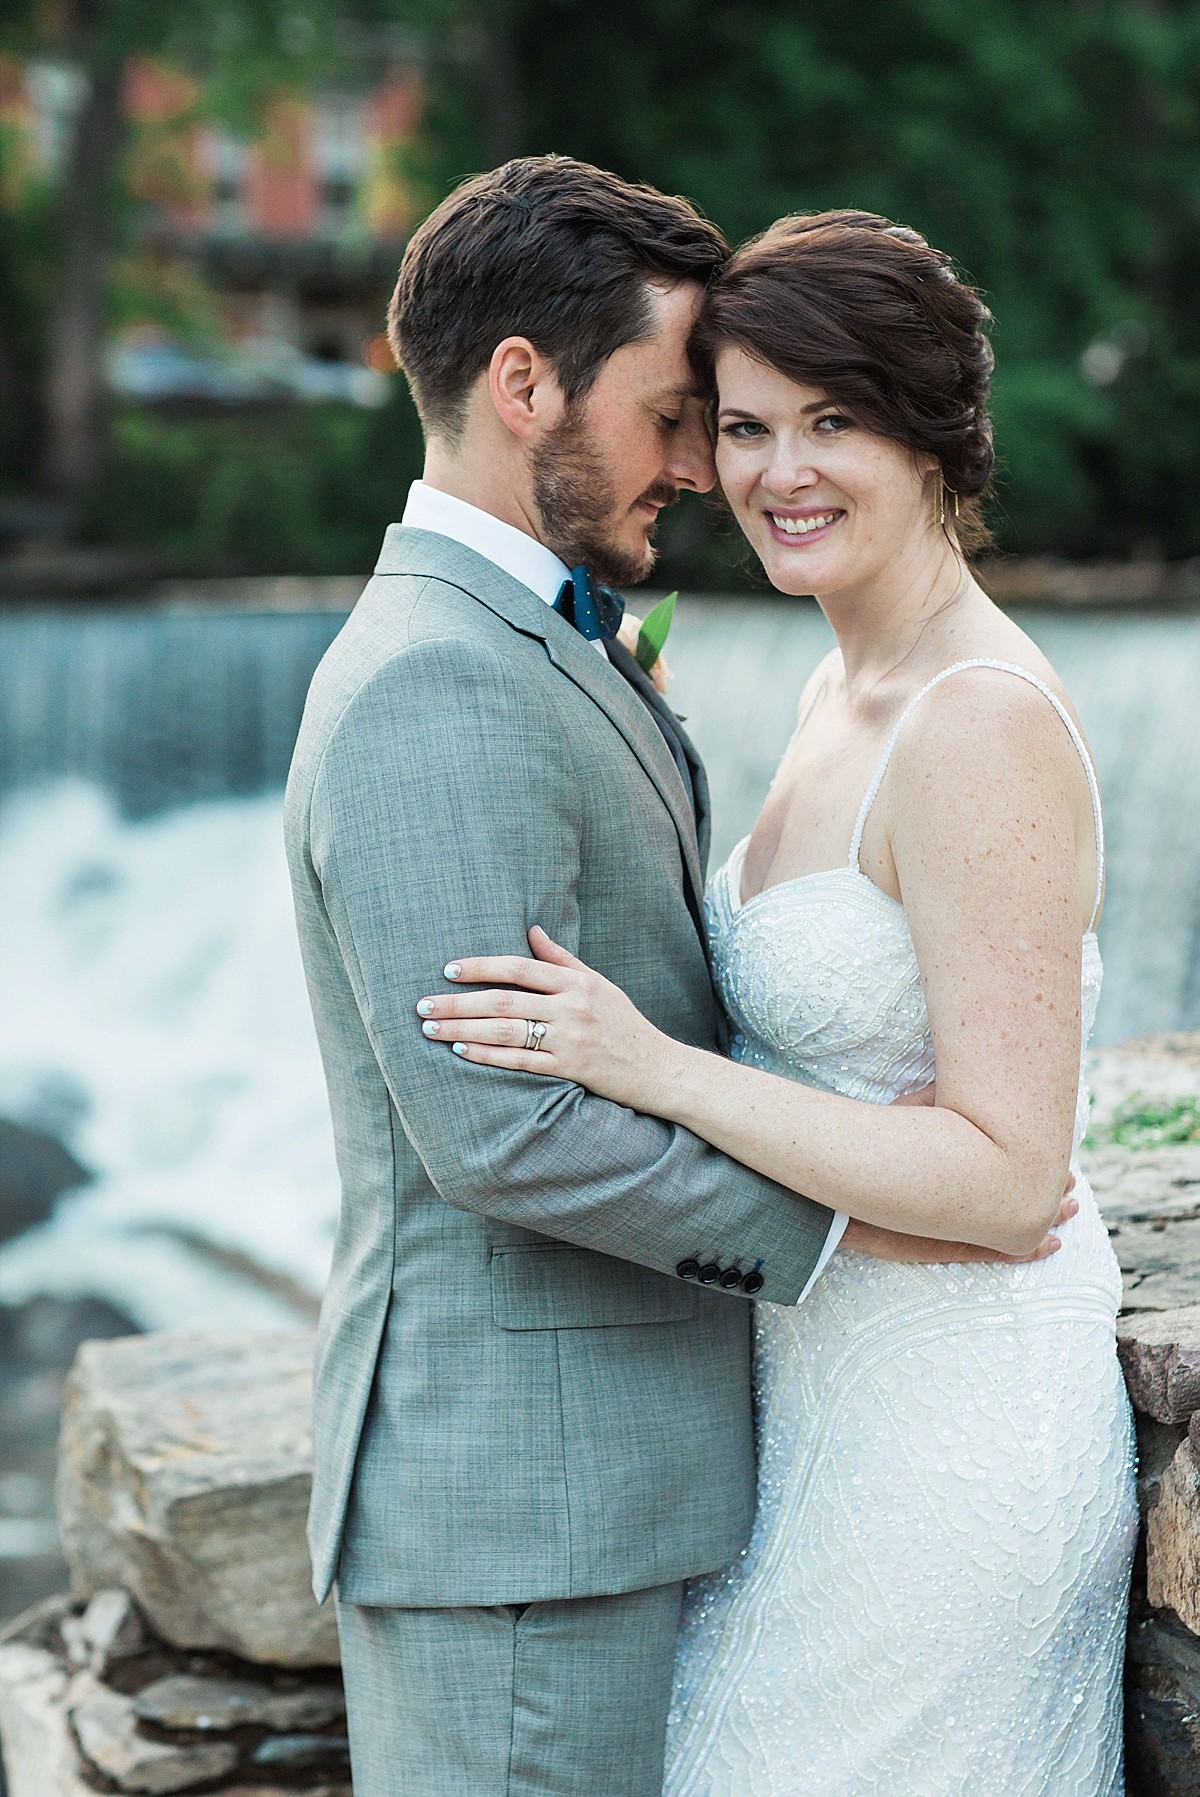 Couples wedding portraits at Beacon Falls, by Clean Plate Pictures, Hudson Valley wedding photographer.